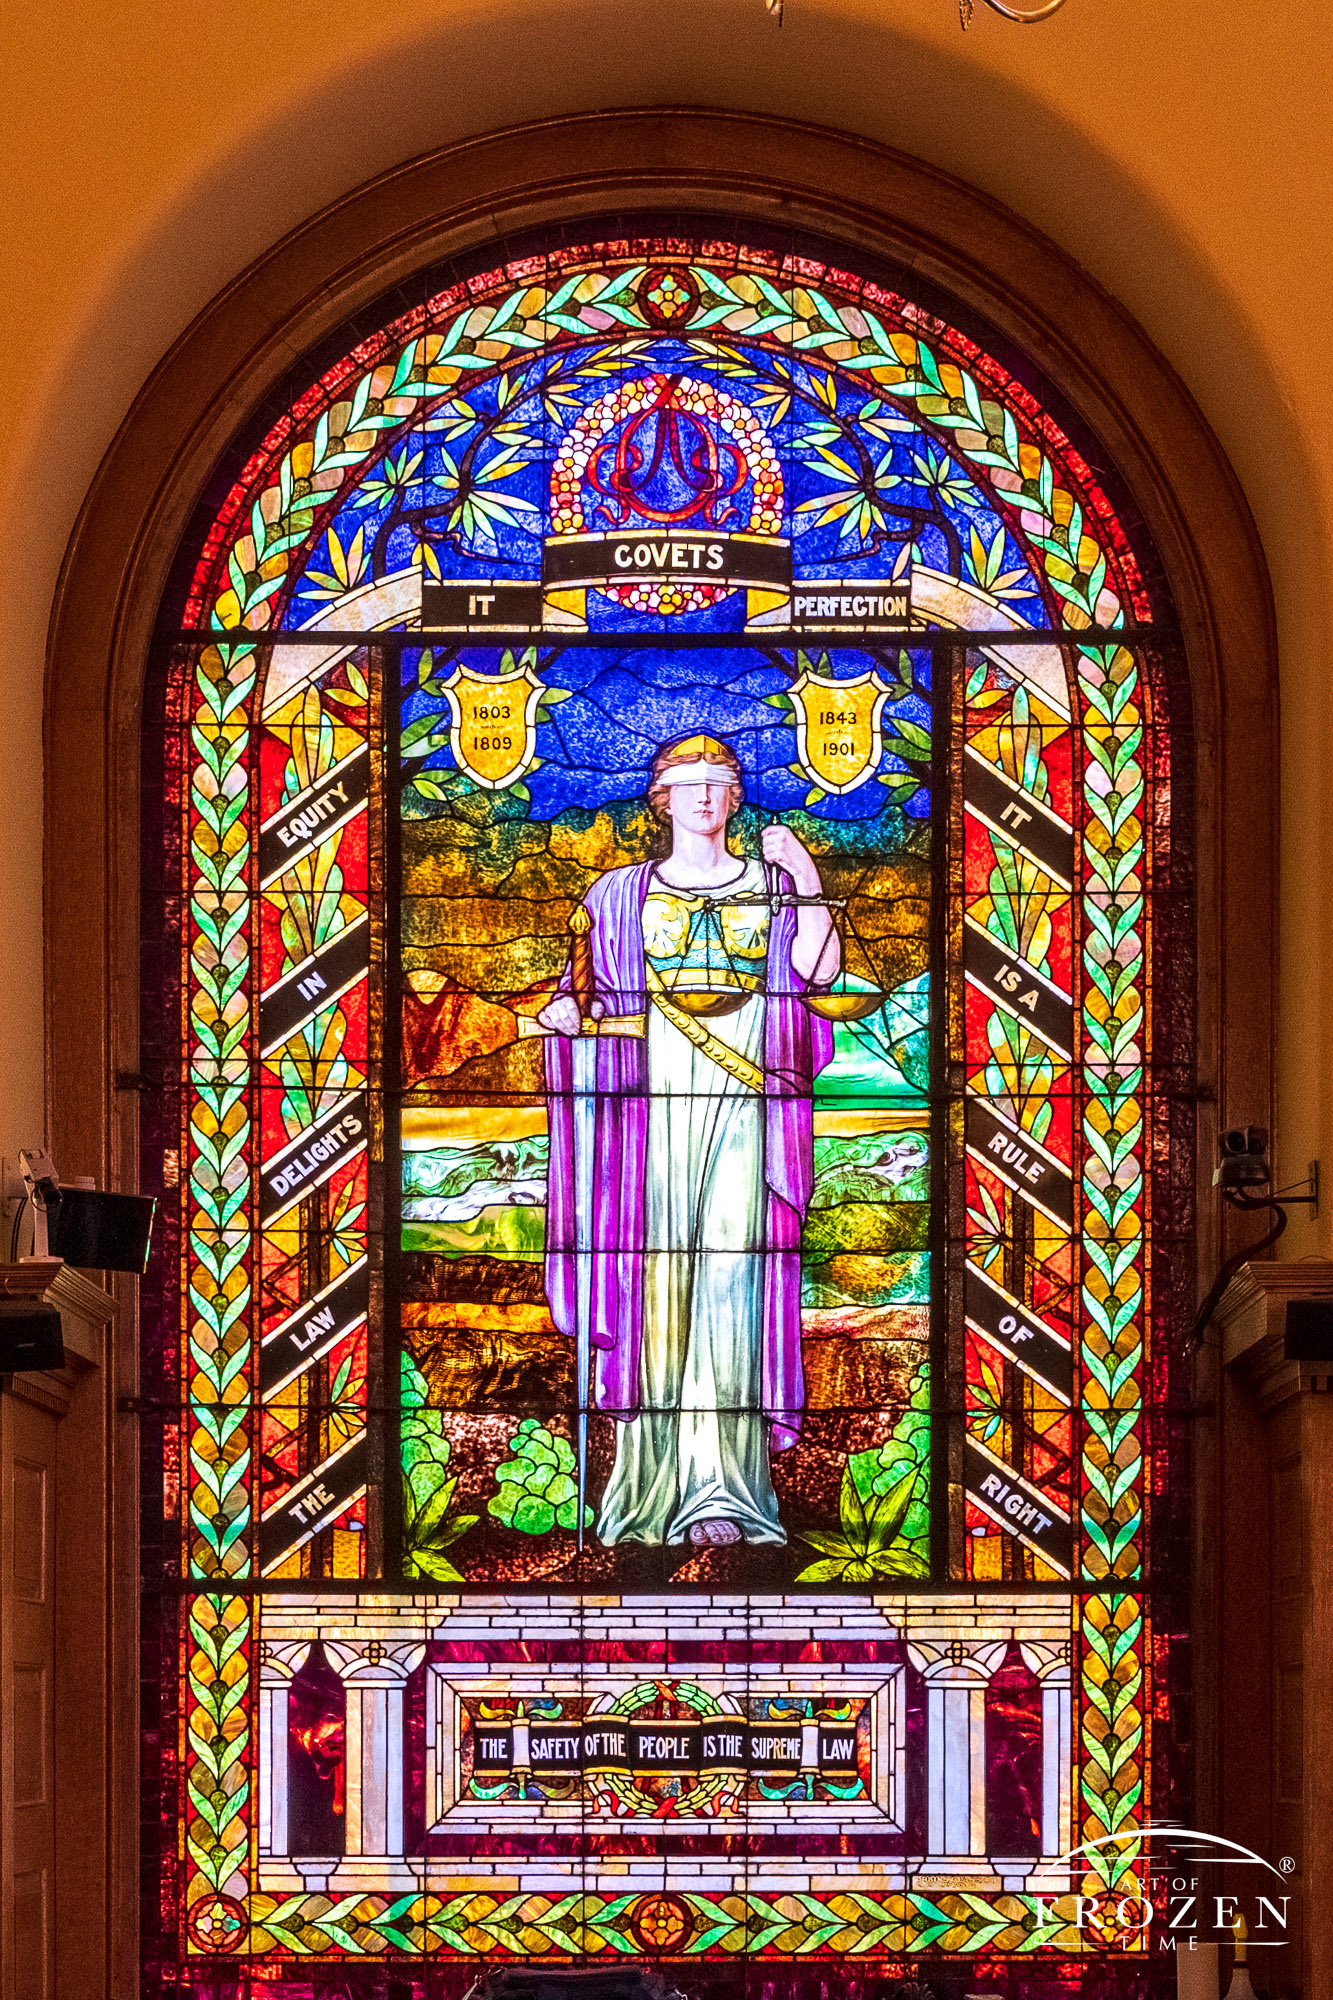 Stained-glass window featuring a blindfolded woman holding the scales of justice